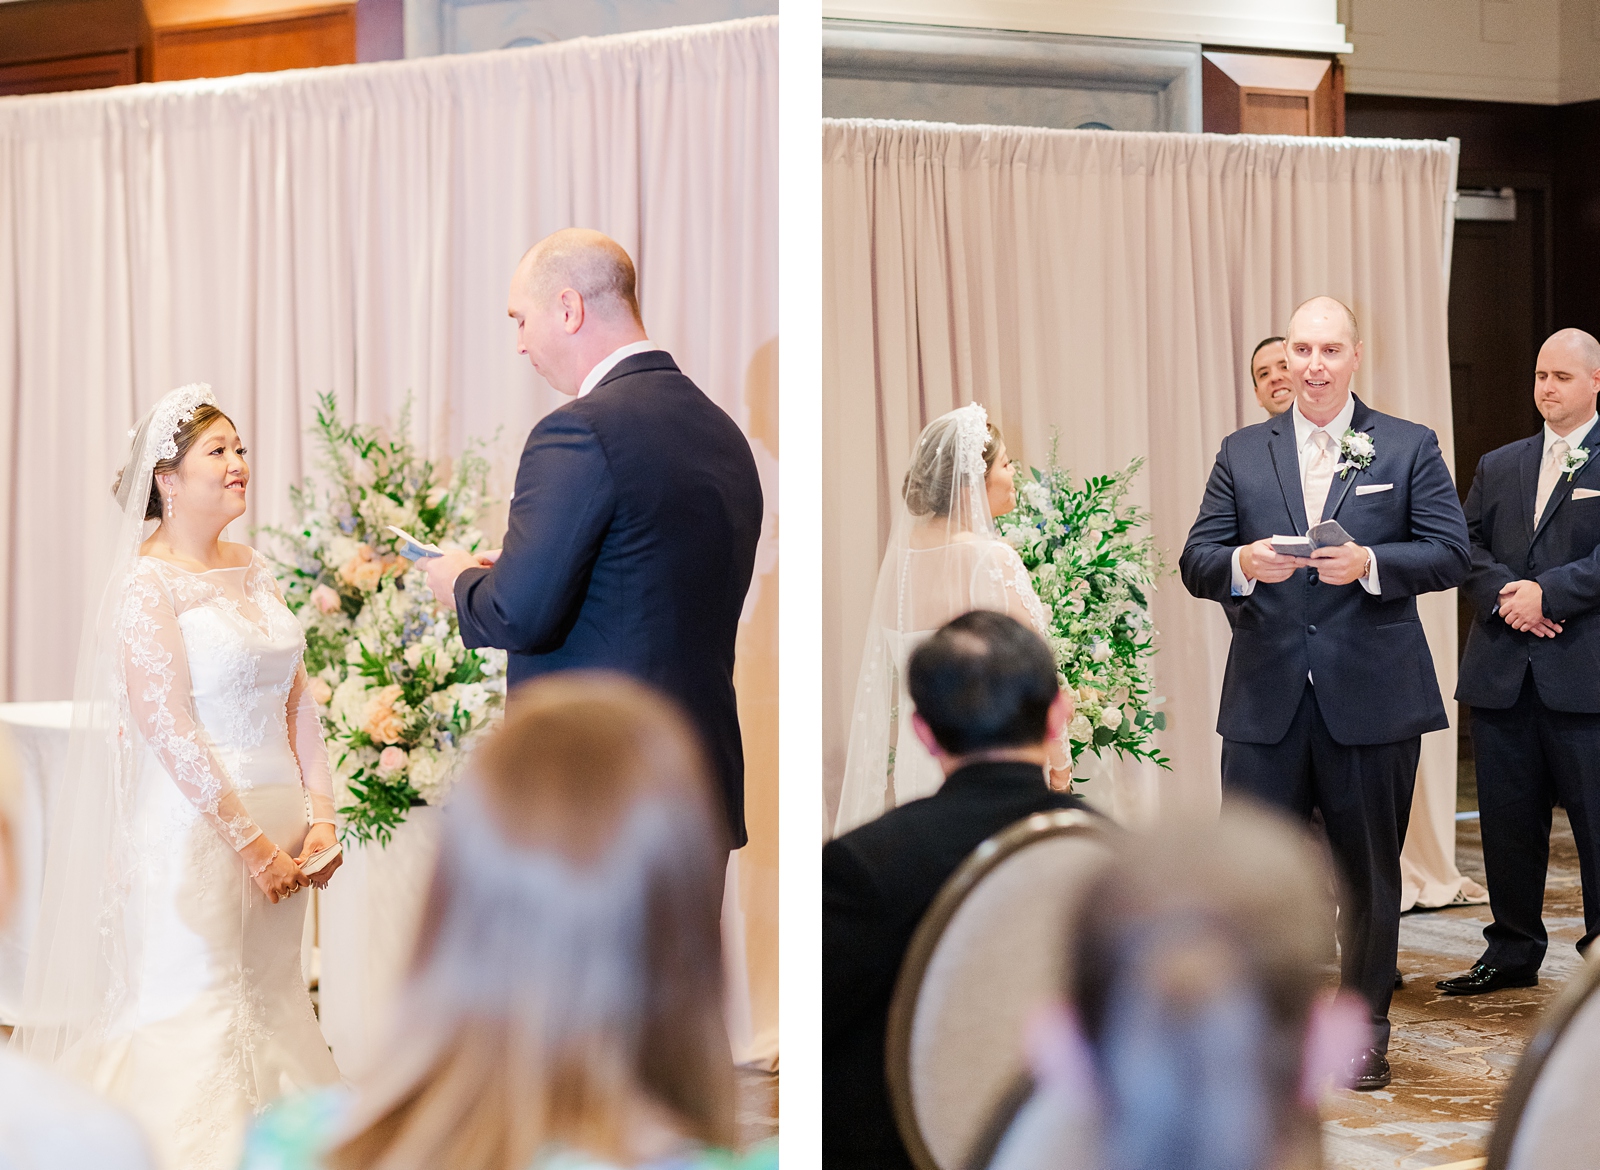 Wedding Ceremony with Pink Details at the Richmond Omni Hotel. Photography by Virginia Wedding Photographer Kailey Brianne Photography.